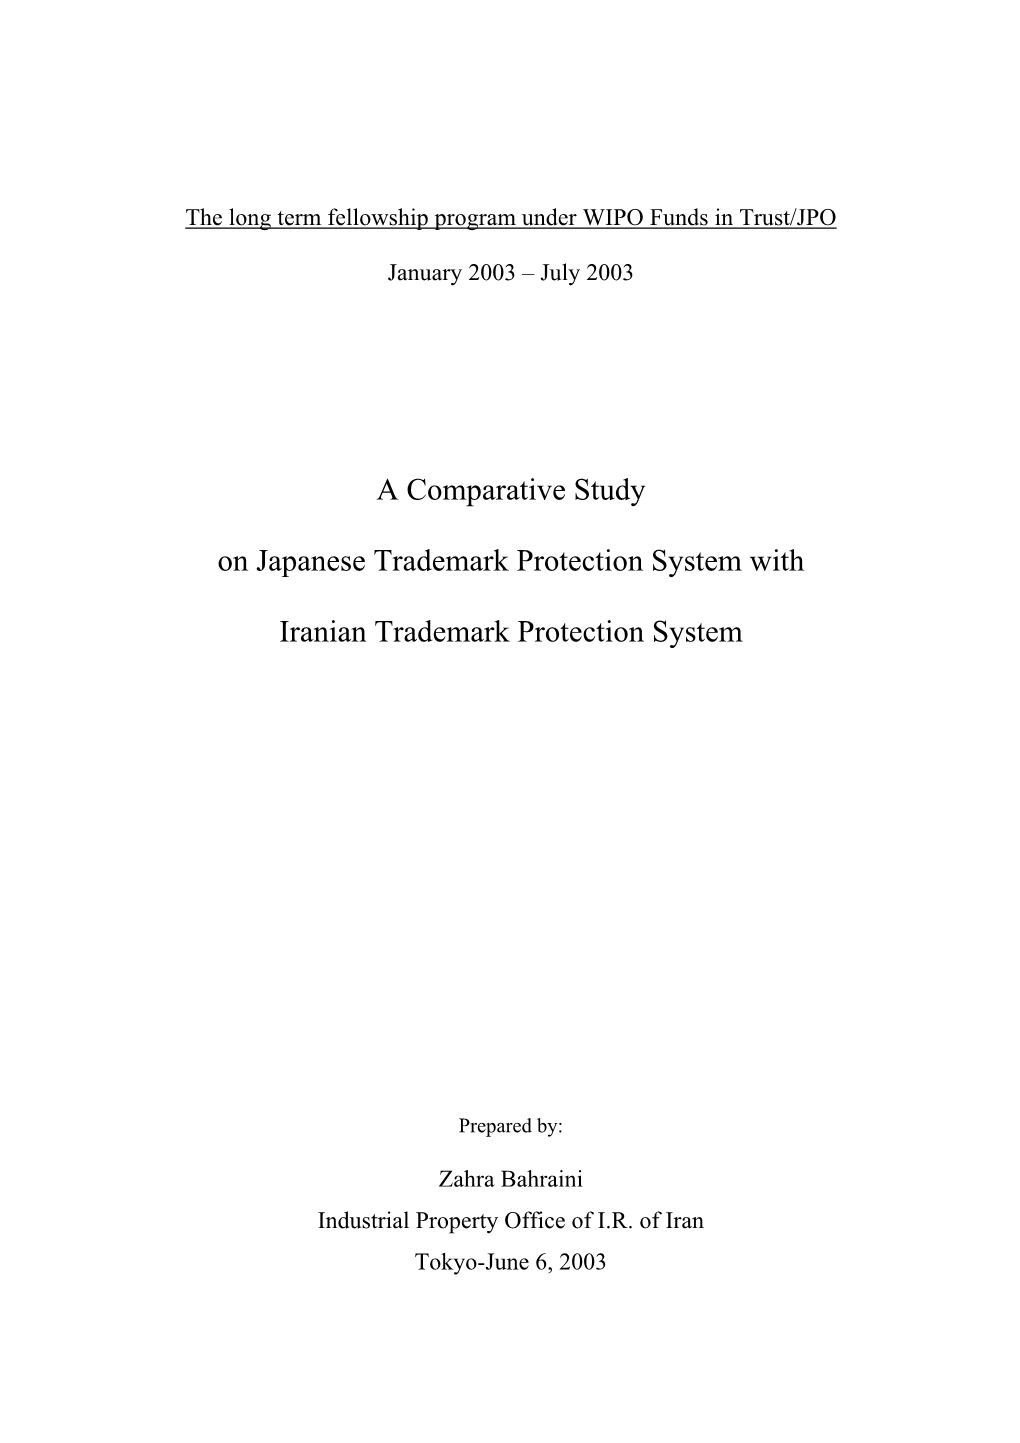 A Comparative Study on Japanese Trademark Protection System With